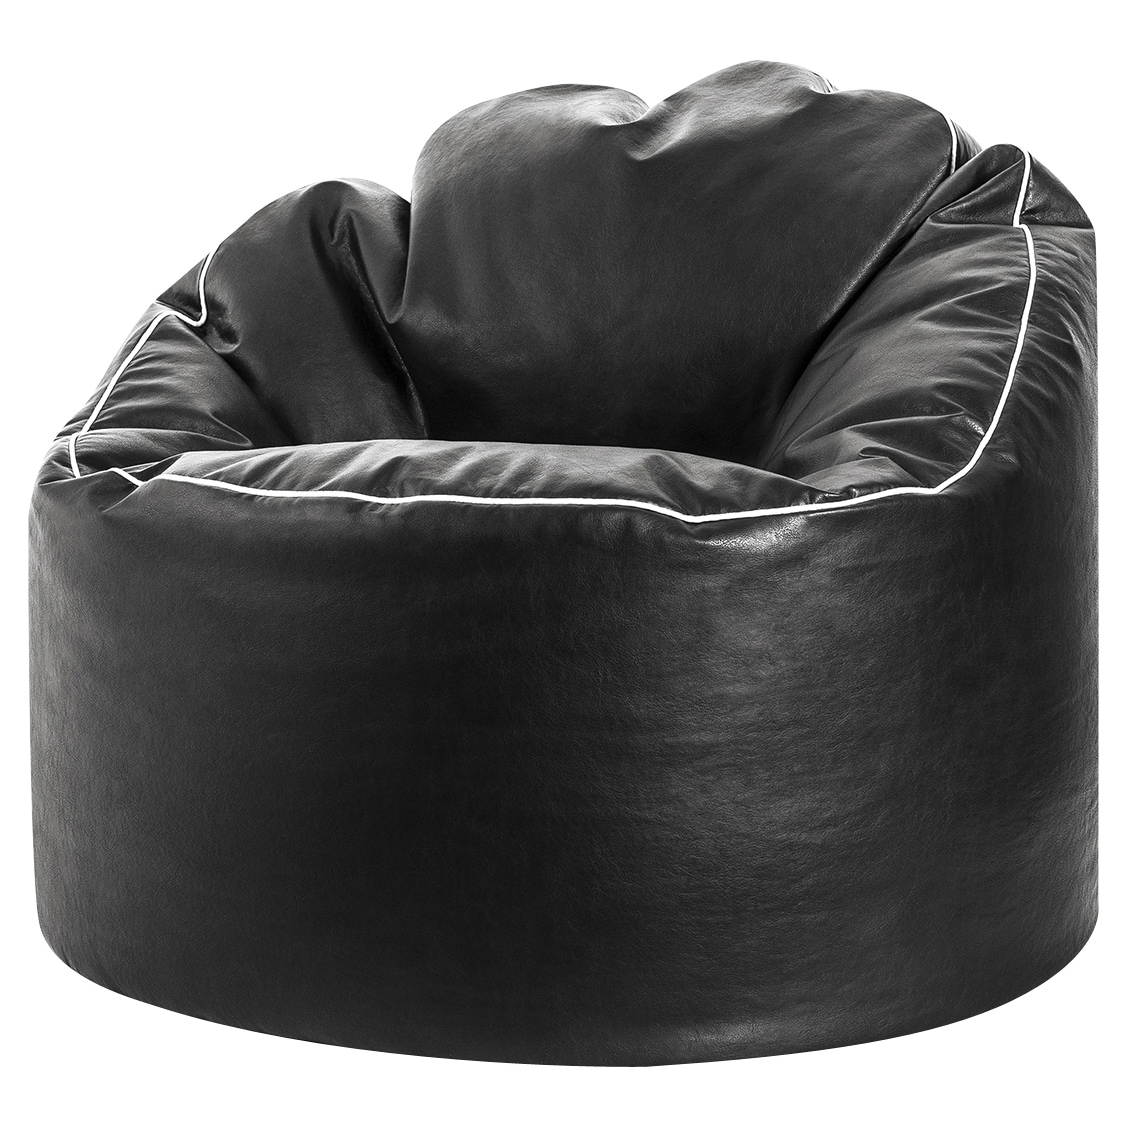 MACCA Brand - XXXL Faux Leather Bean Bag Chair with Stool & Cushion Without  Beans (Black) : Amazon.in: Home & Kitchen